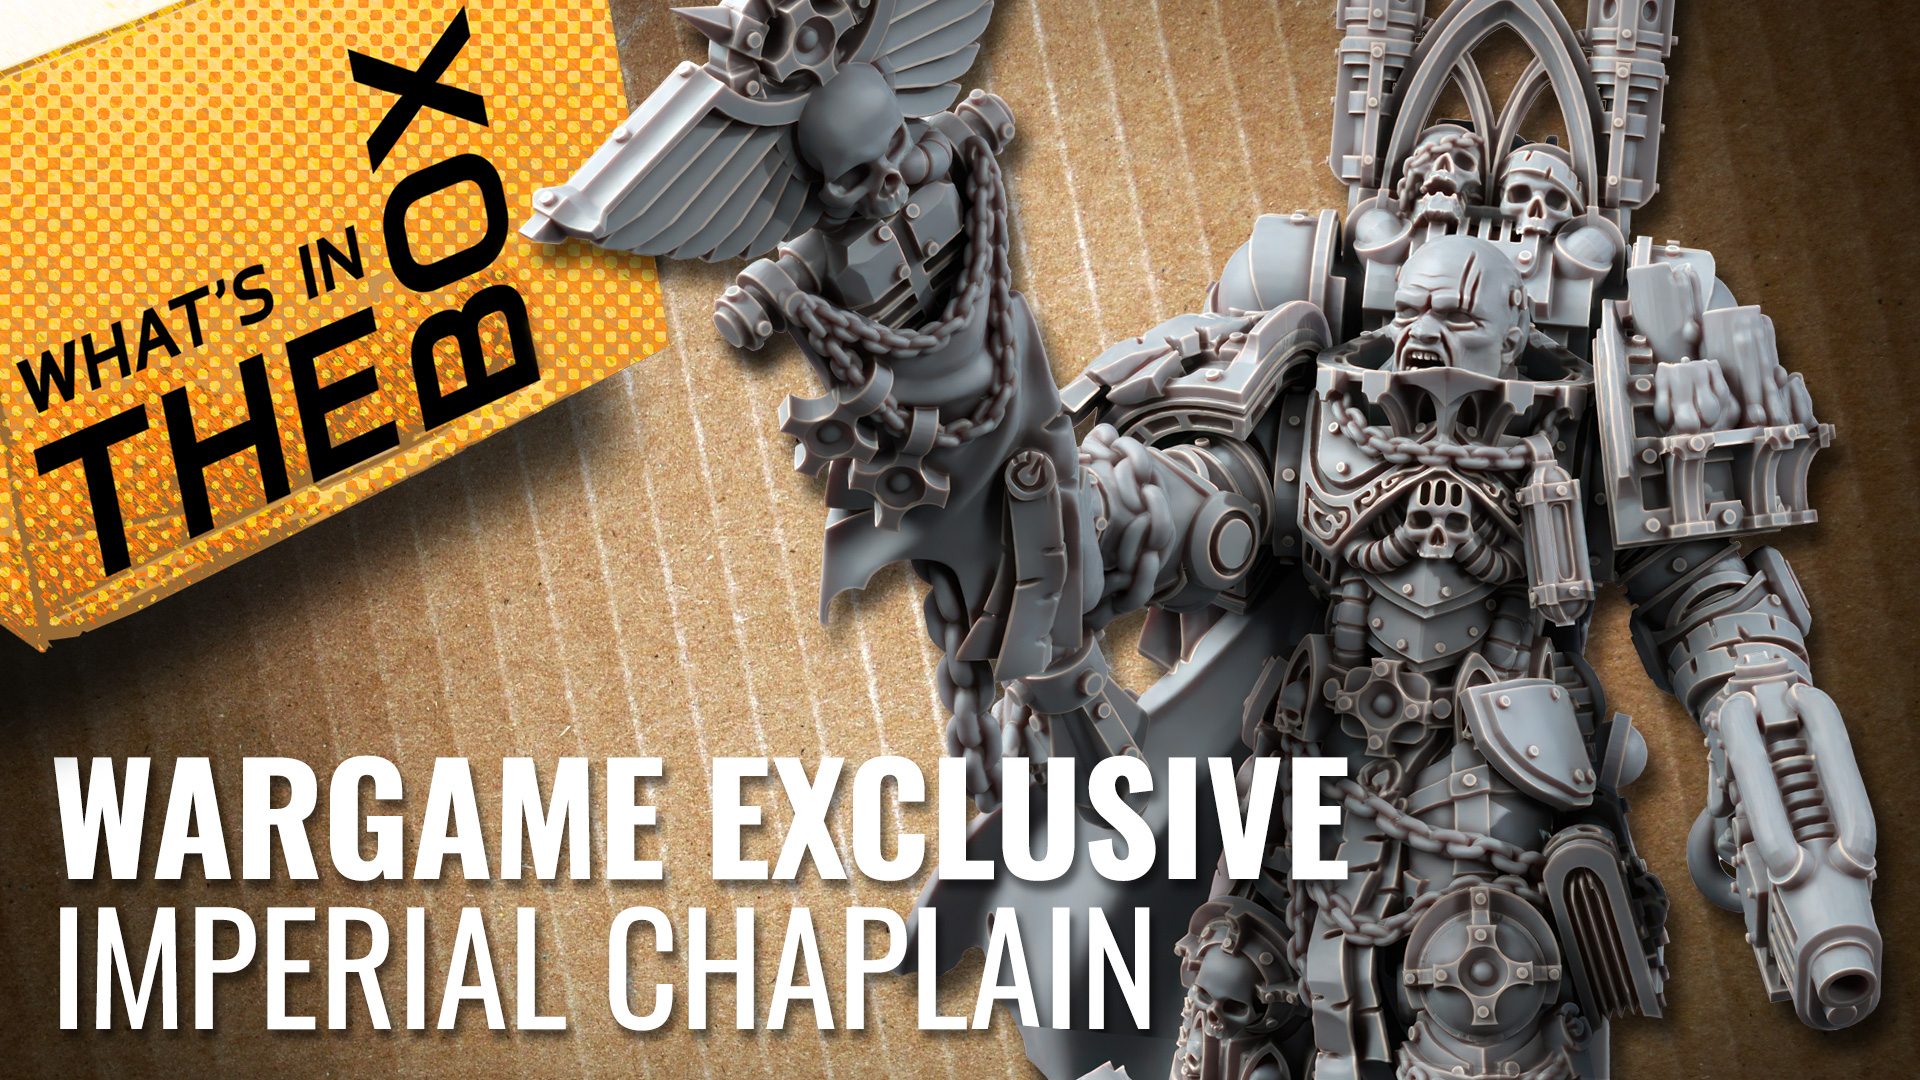 Unboxing-Wargames-Exclusive_Imperial-Chaplin-coverimage-2